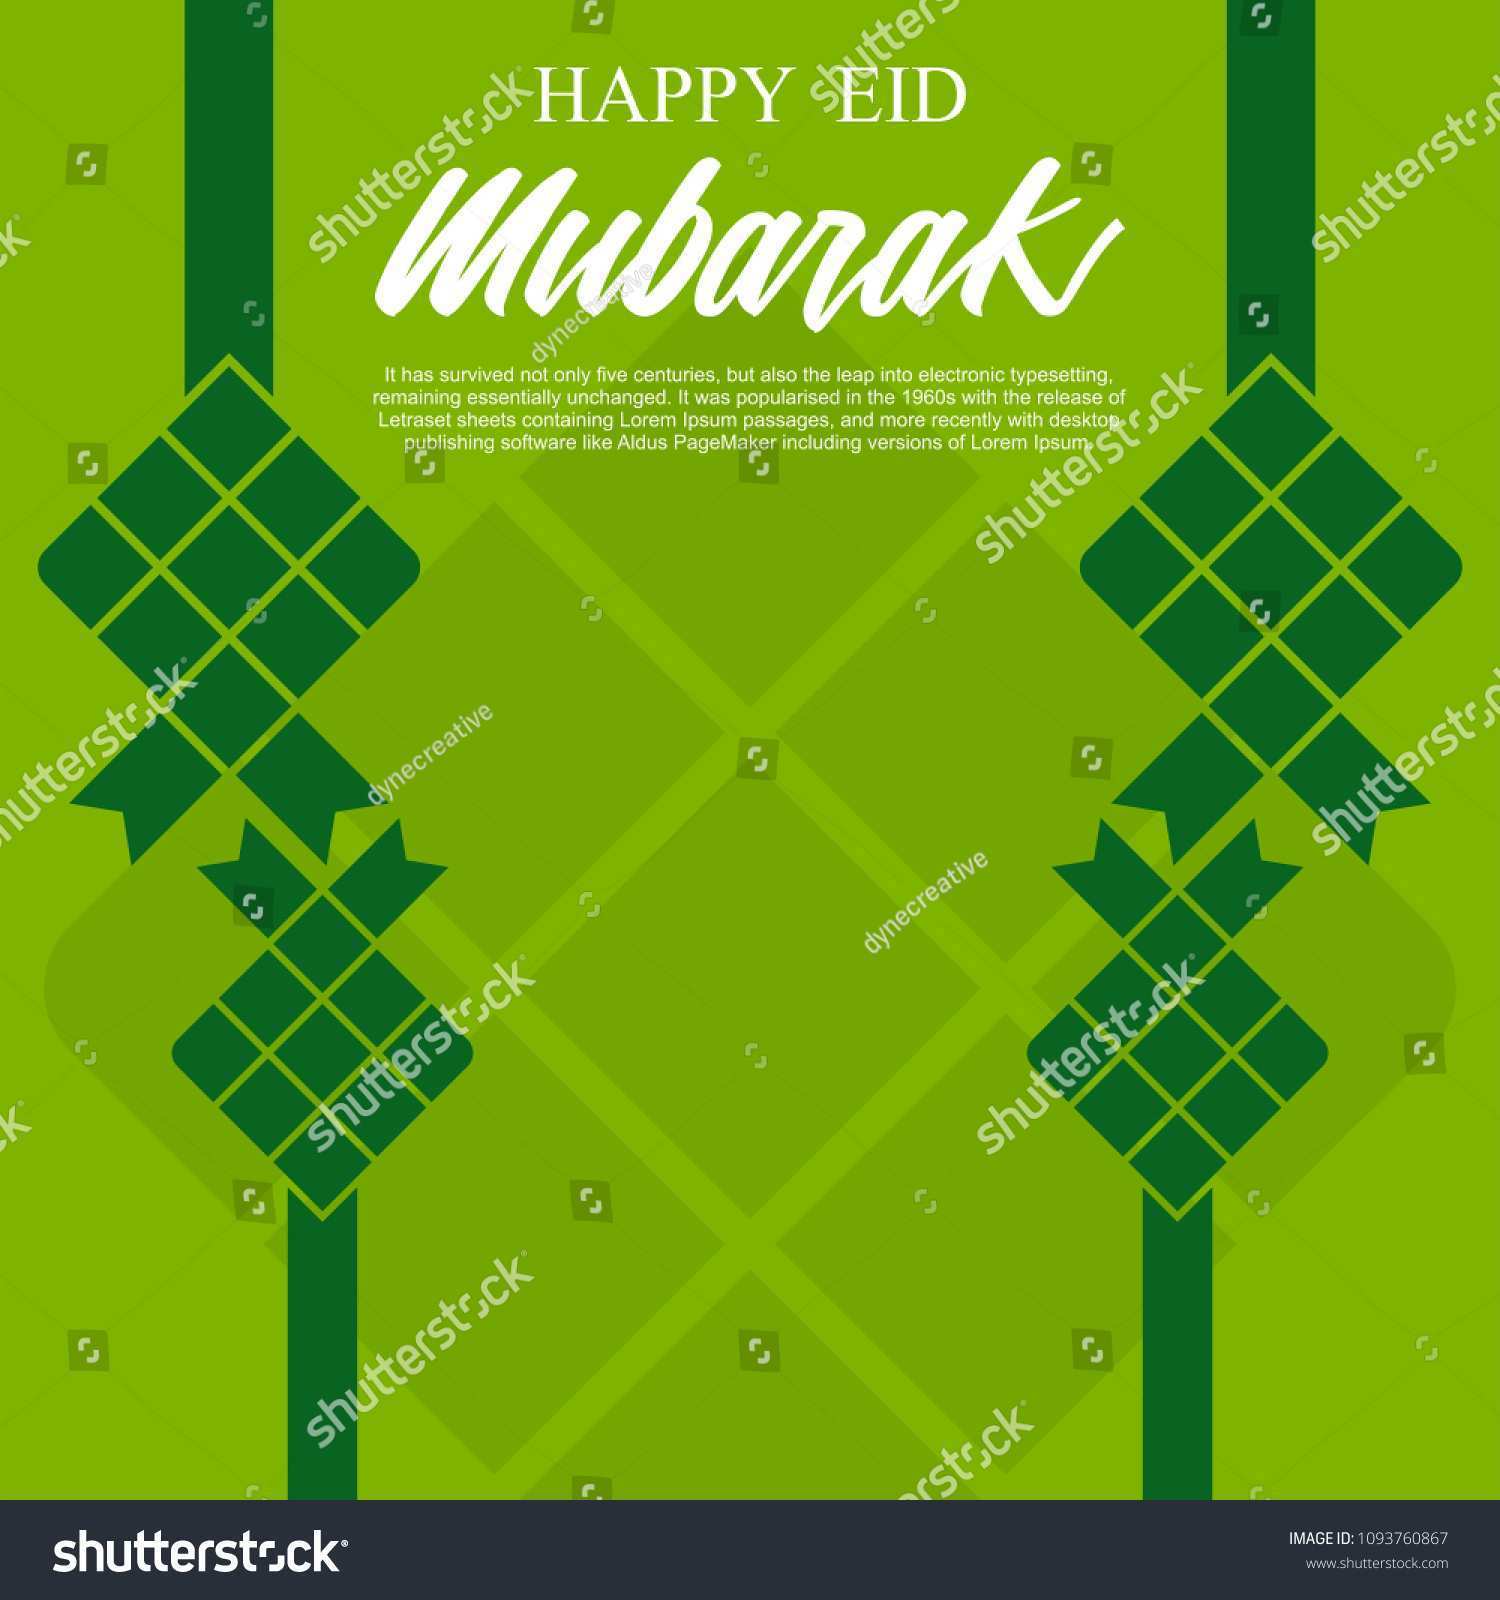 92 Create Eid Card Templates Software Photo for Eid Card Templates Software